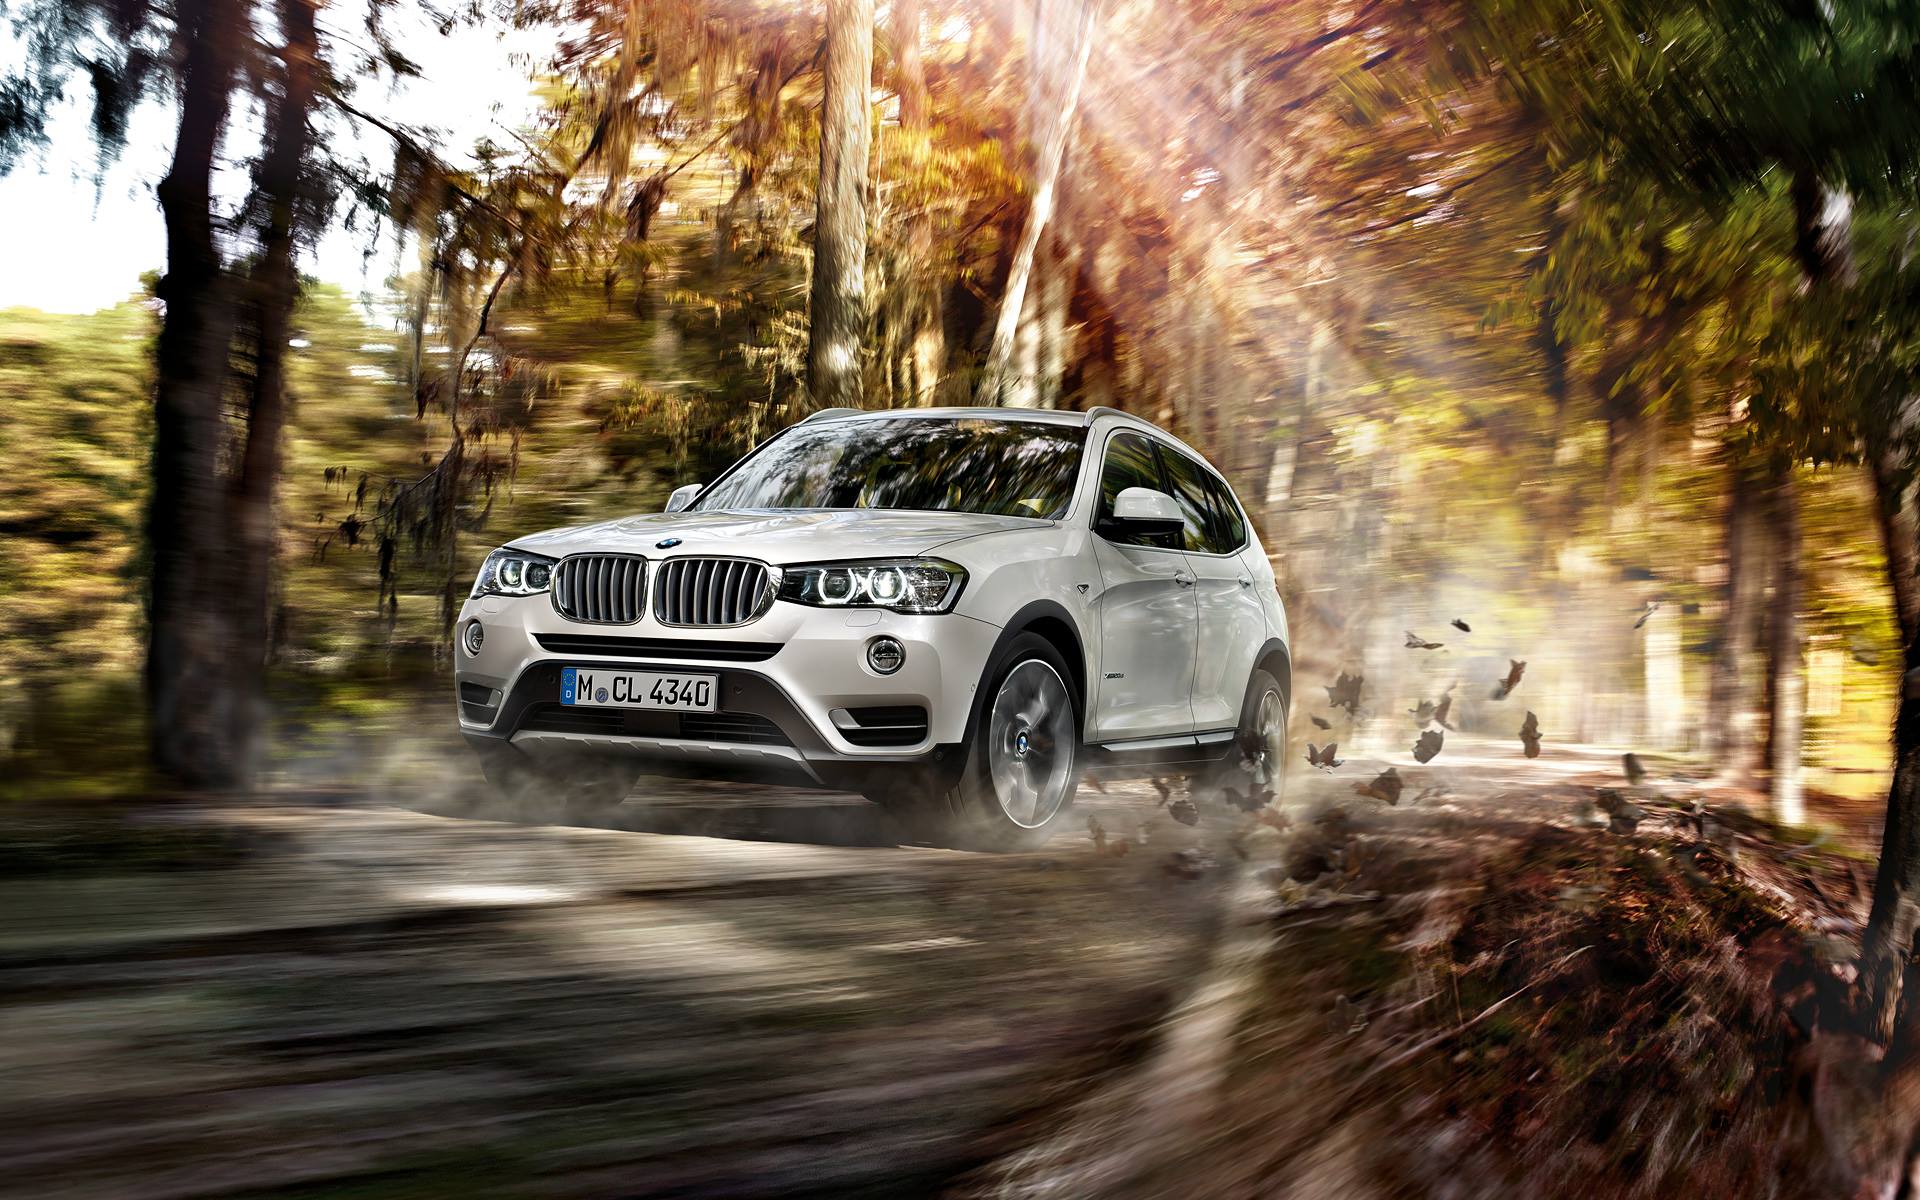 BMW X3 xDrive30d M Sport Launched In India At Rs. 59.90 Lakhs (Ex-Showroom, New Delhi)